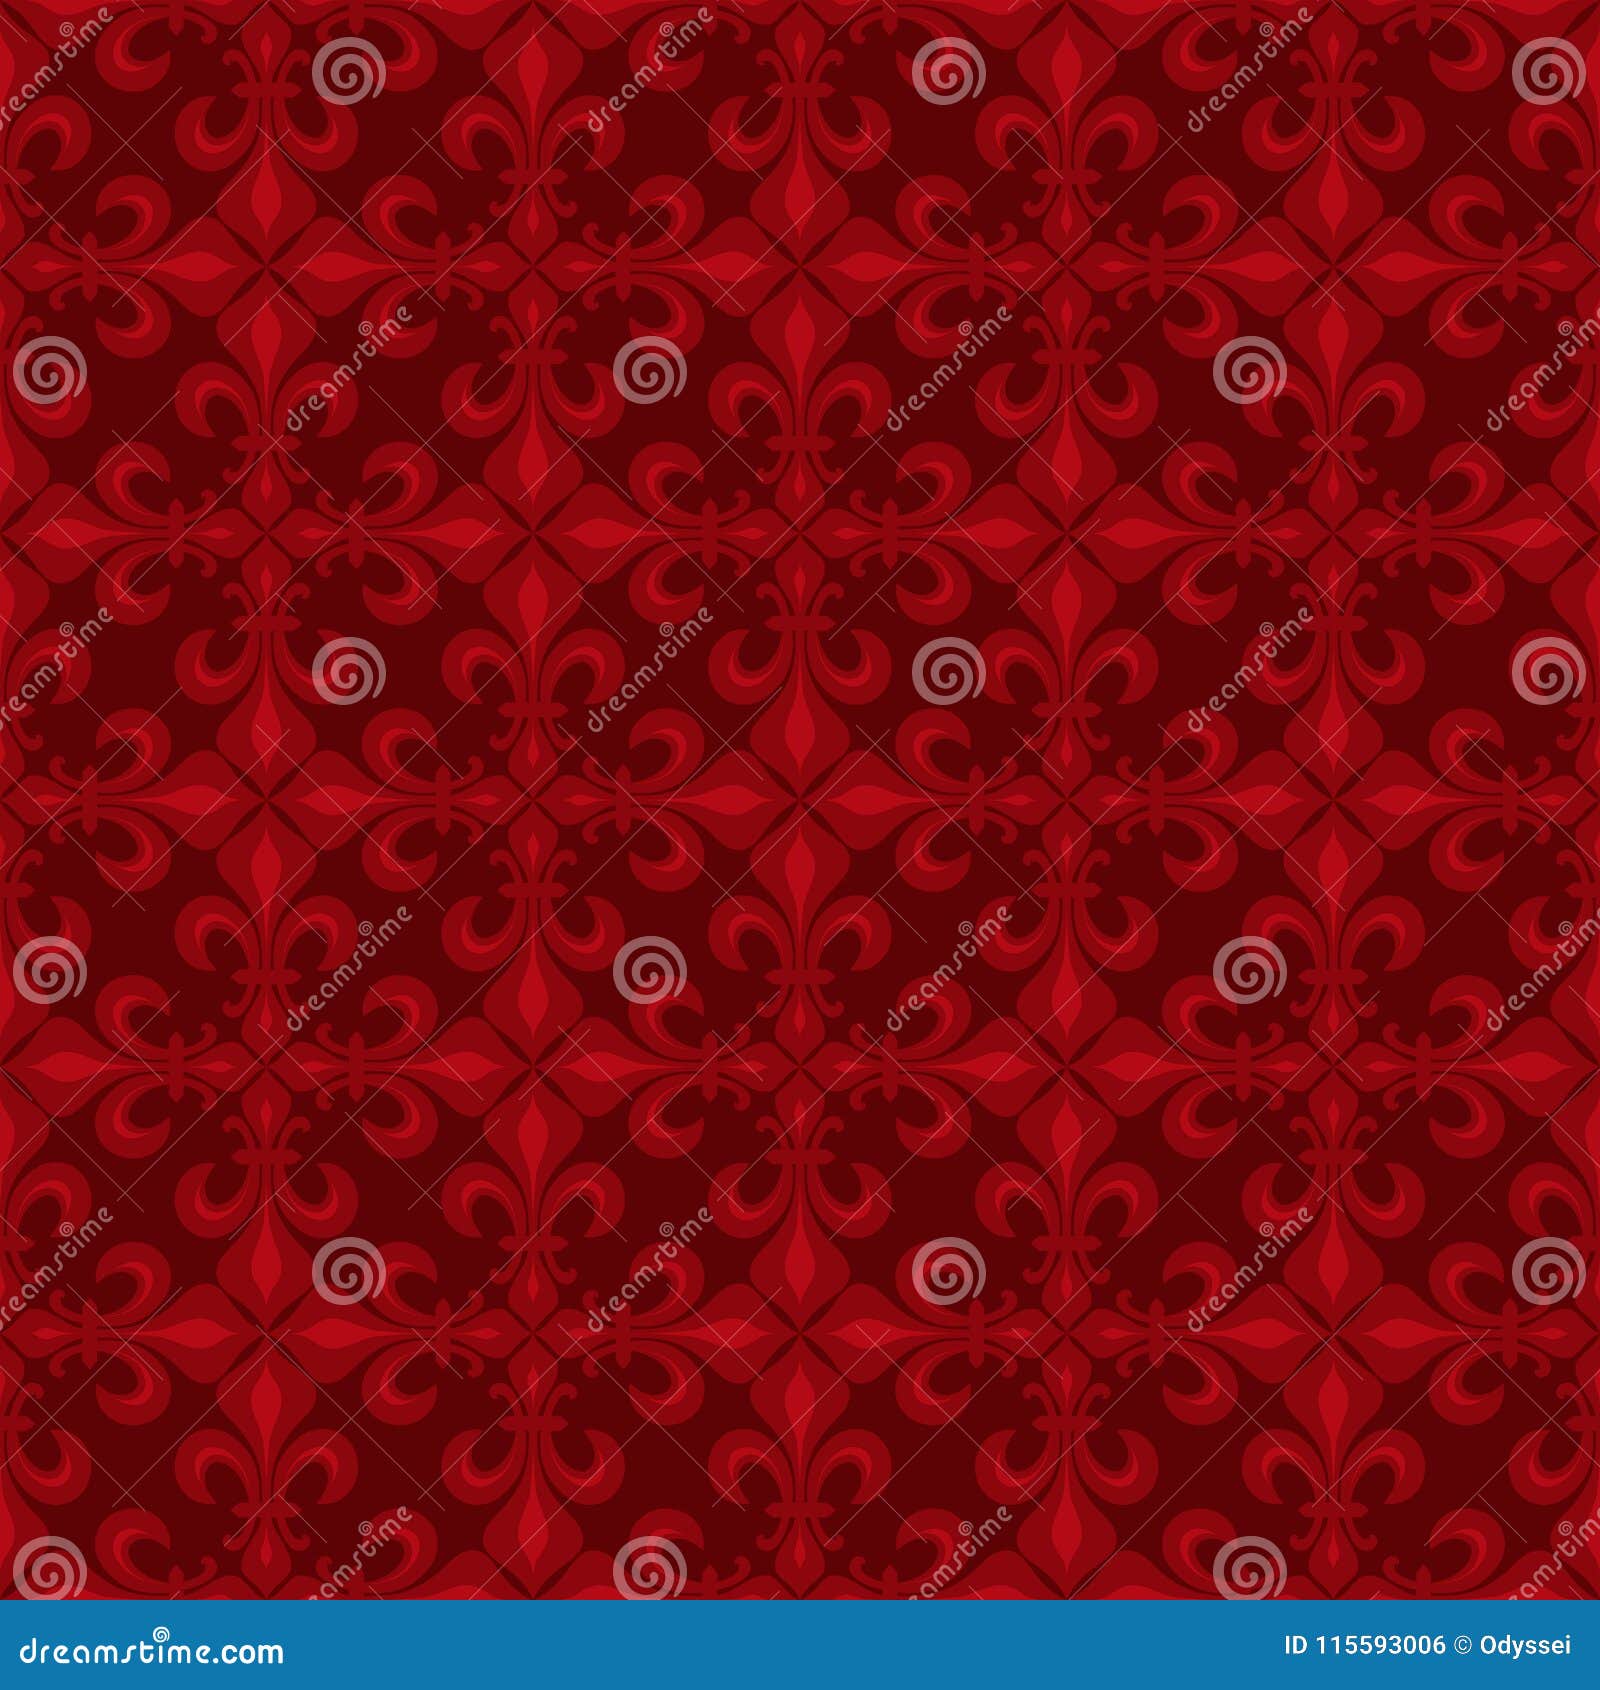 lace-de-luce (lace of lilies), red seamless pattern